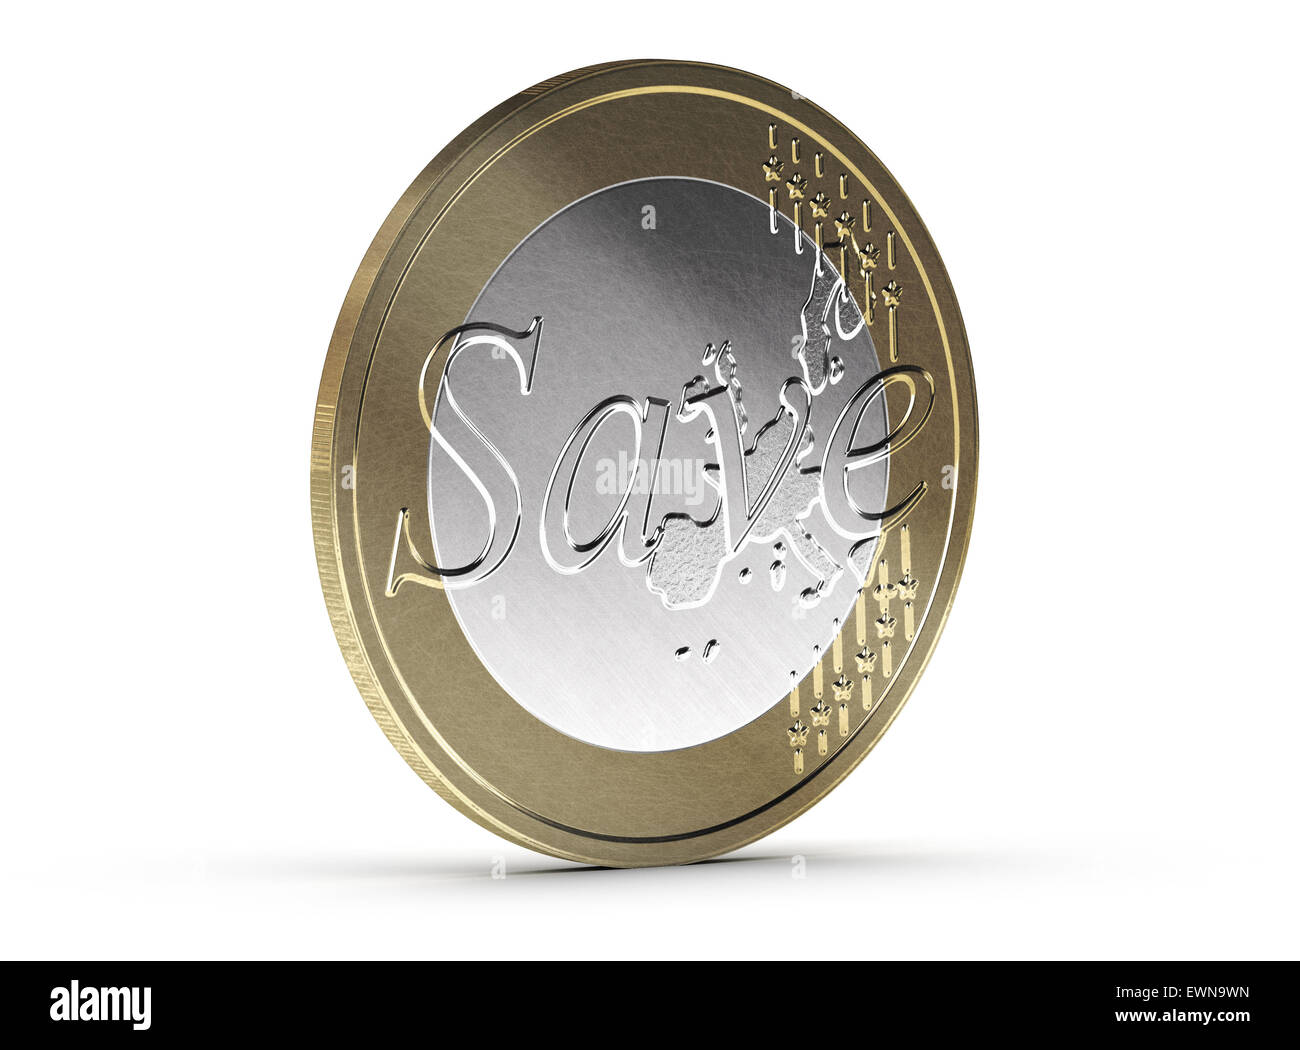 Save euro coin over white background with shadow and scratches. Conceptual image for illustration of money saving. Finance conce Stock Photo